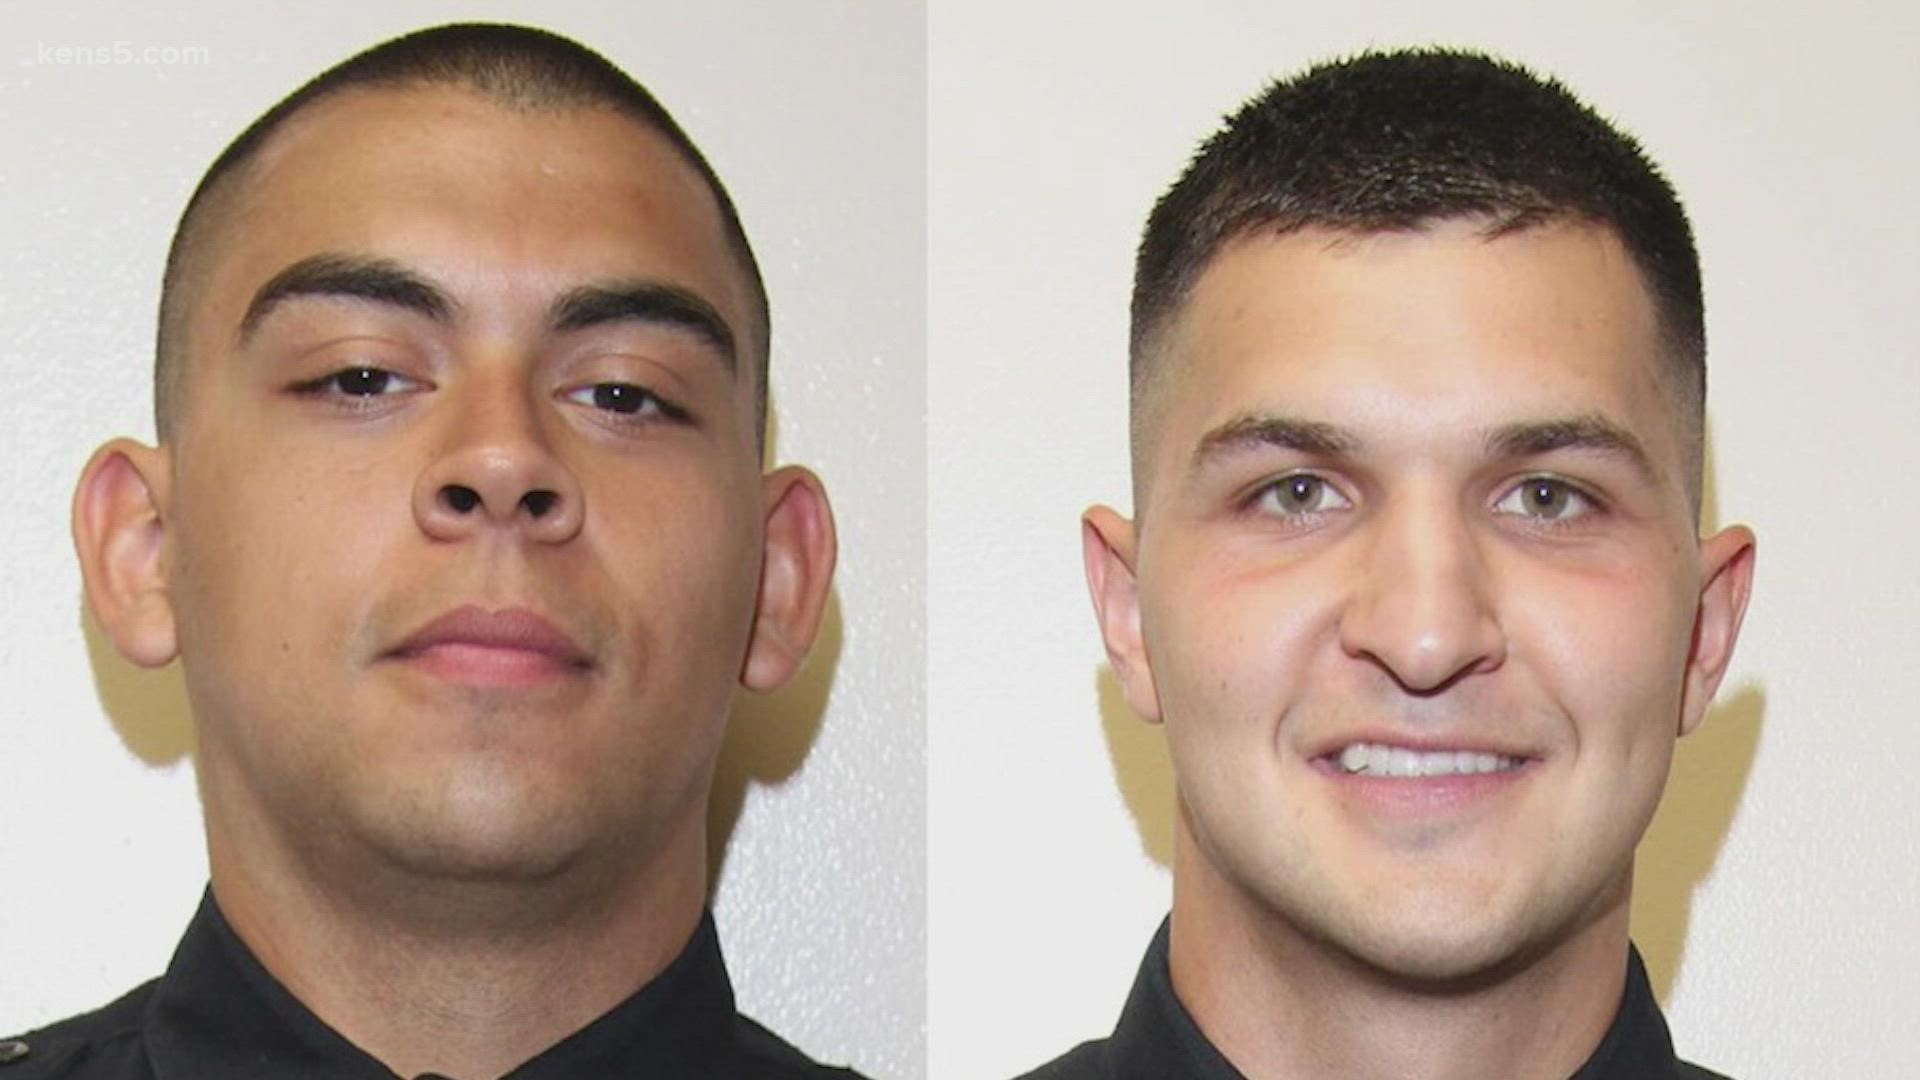 The two officers were eventually fired in the aftermath of the January, 2020 incident.